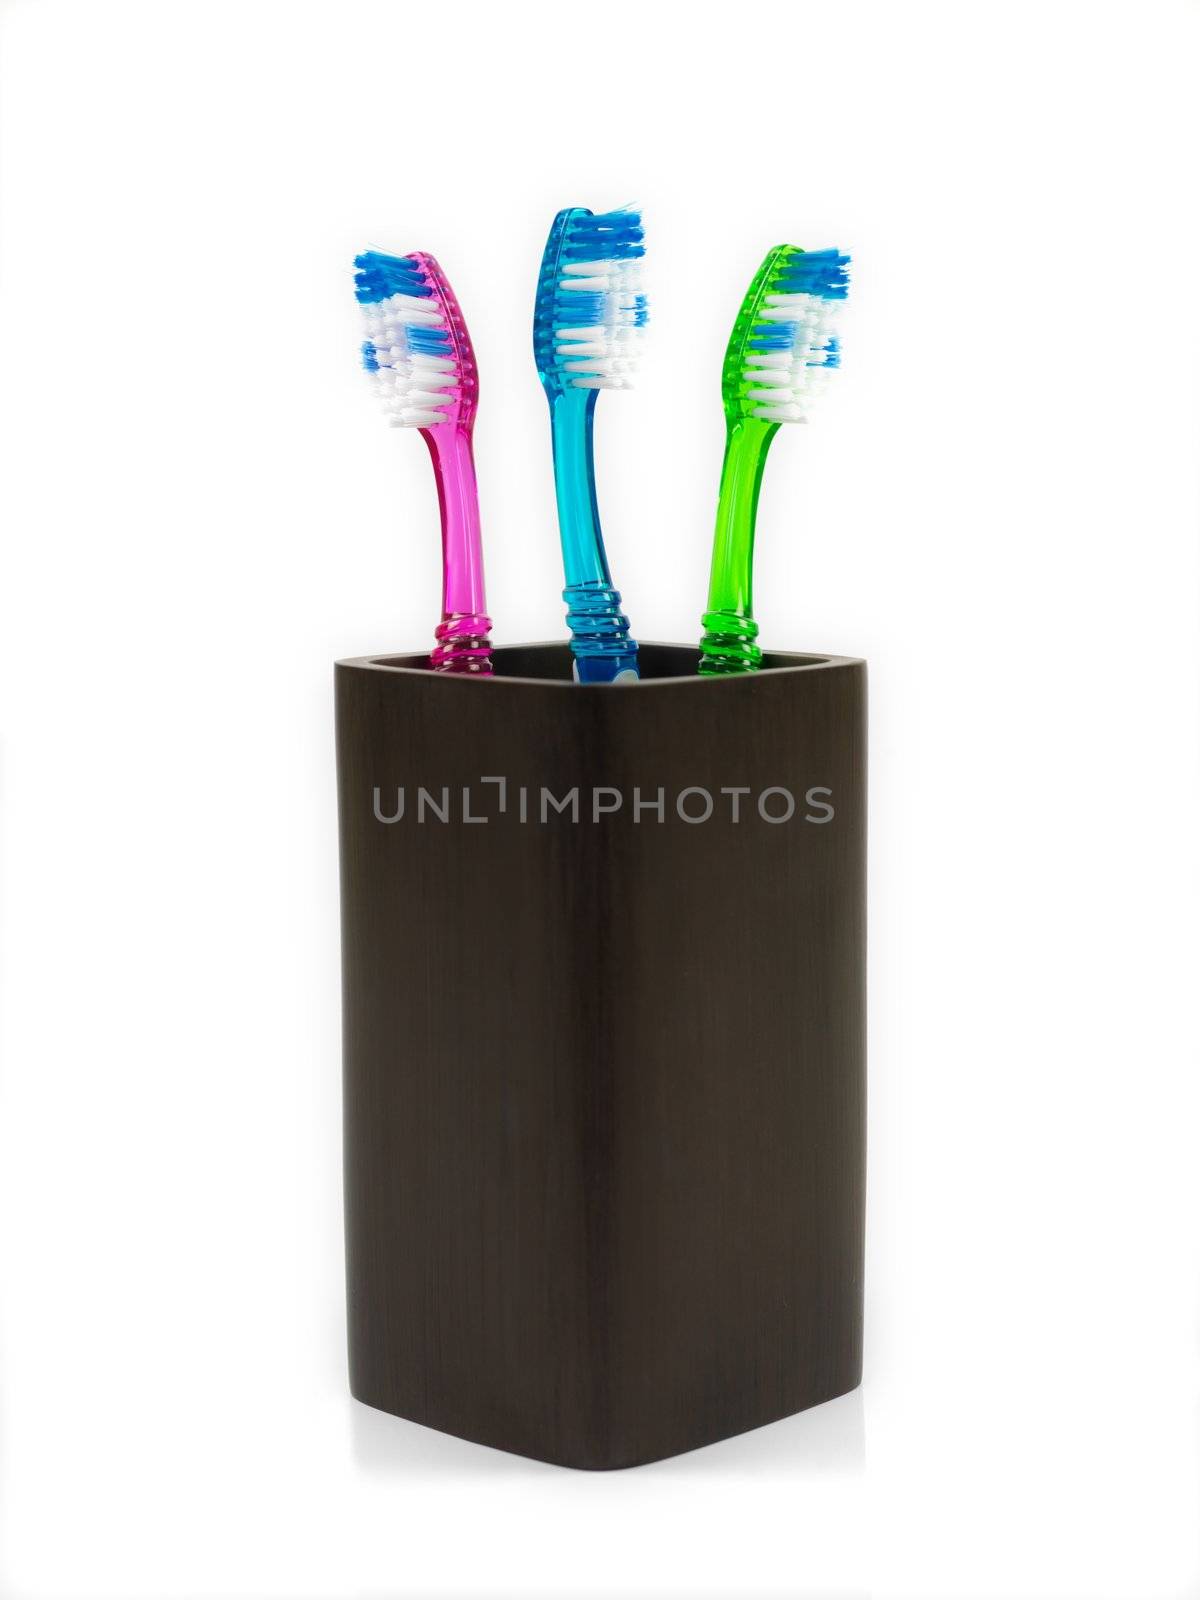 Toothbrushes in toothbrush holder isolated against a white background